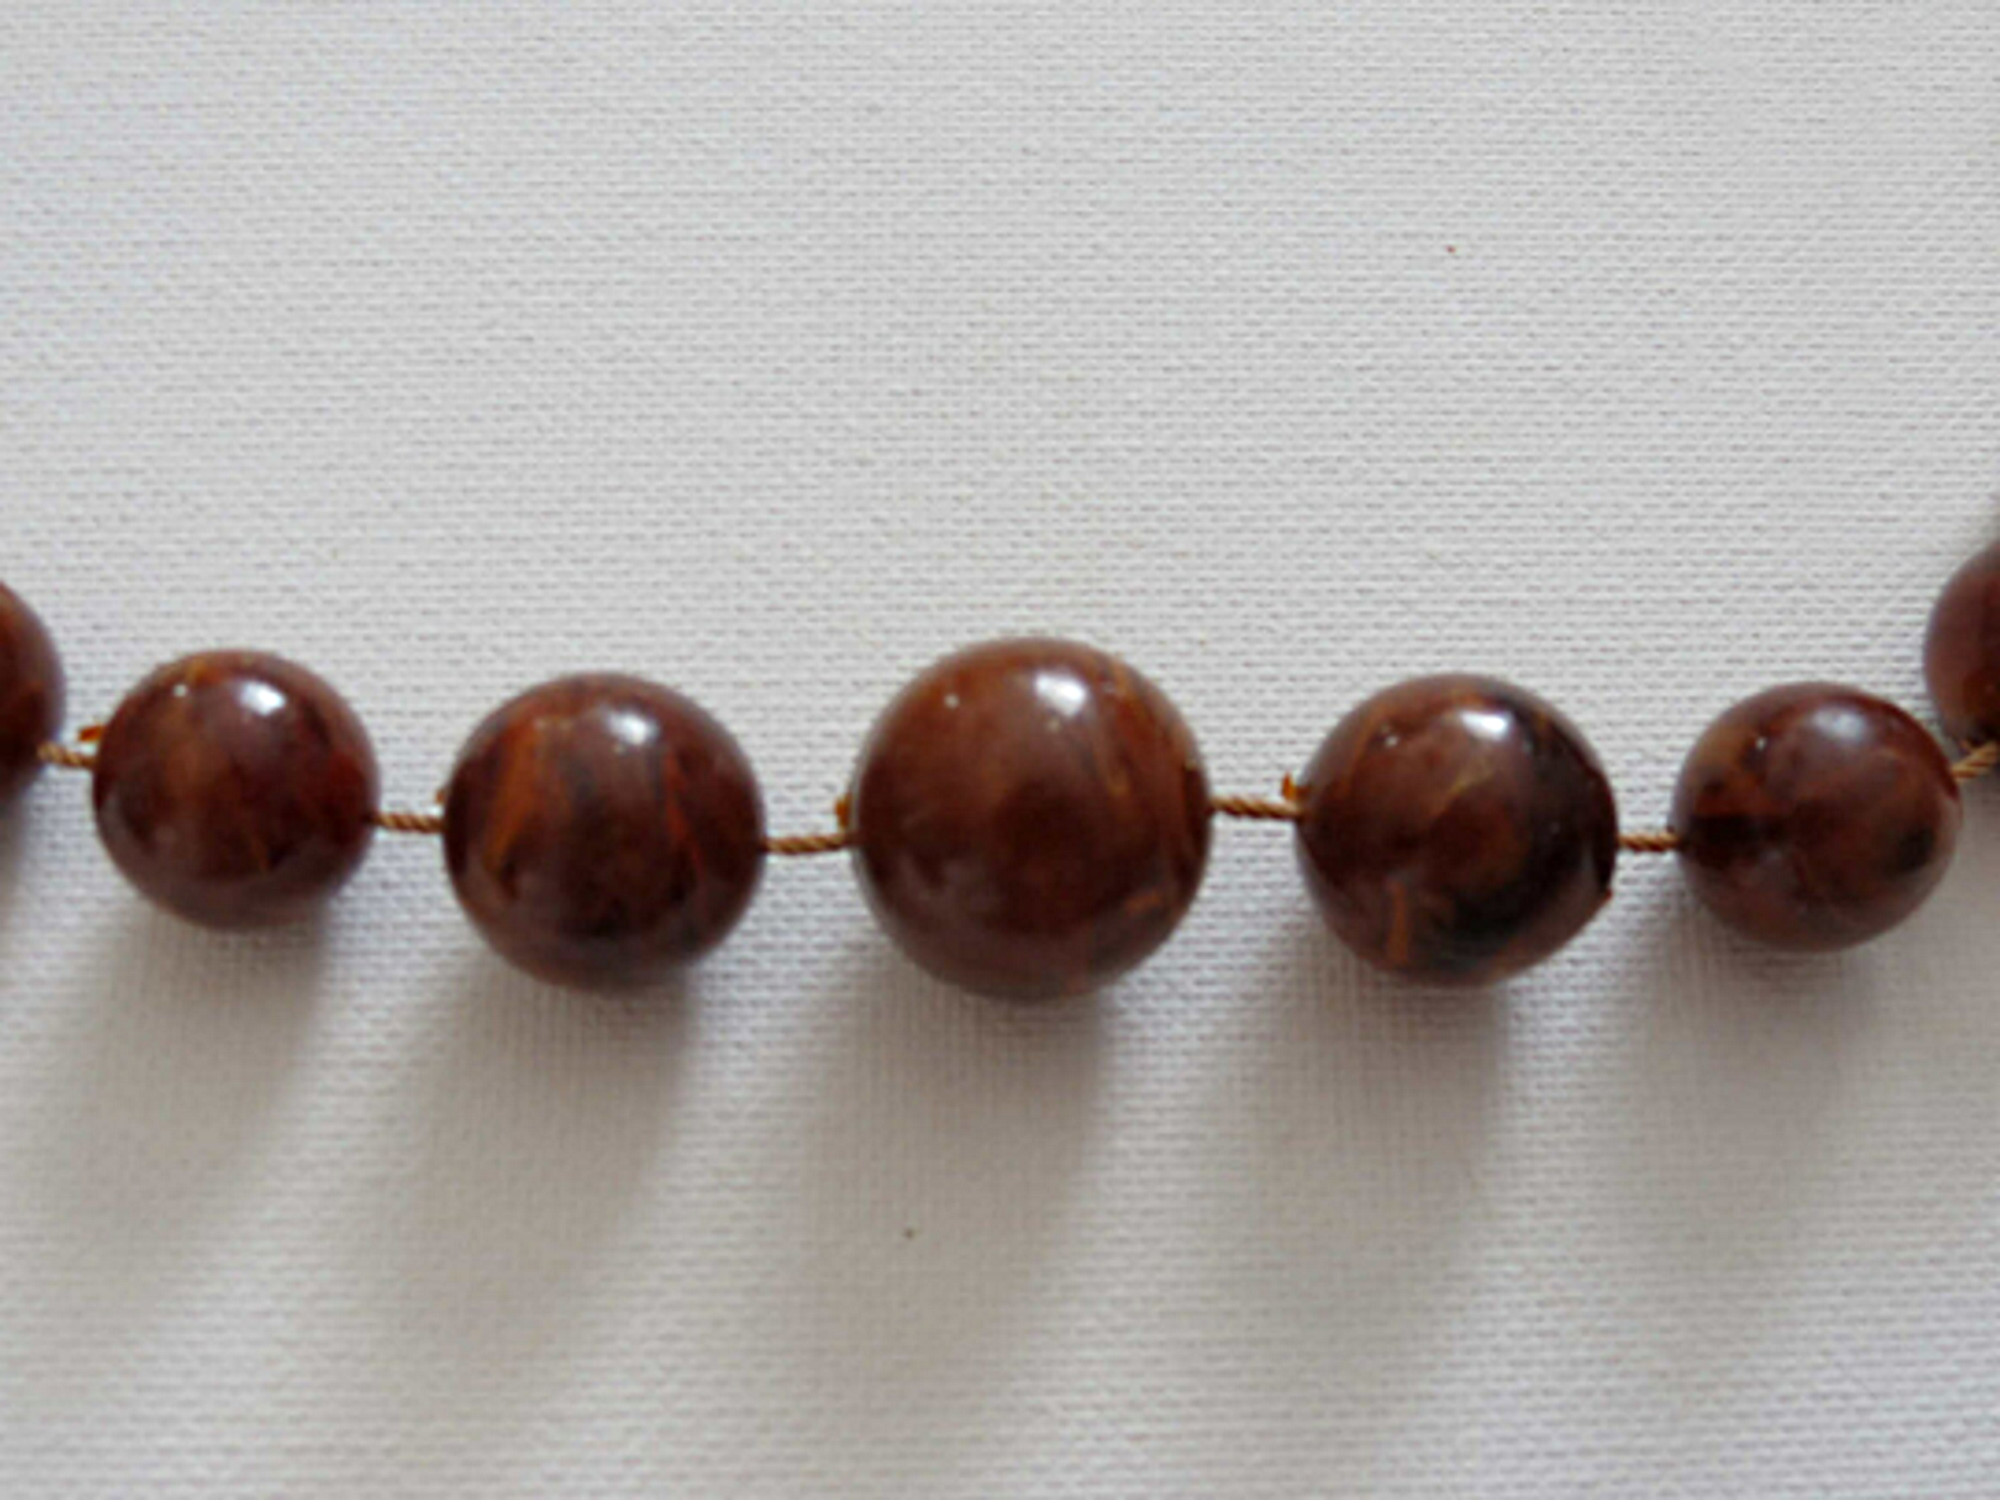 1960s vintage necklace of brown marbled beads